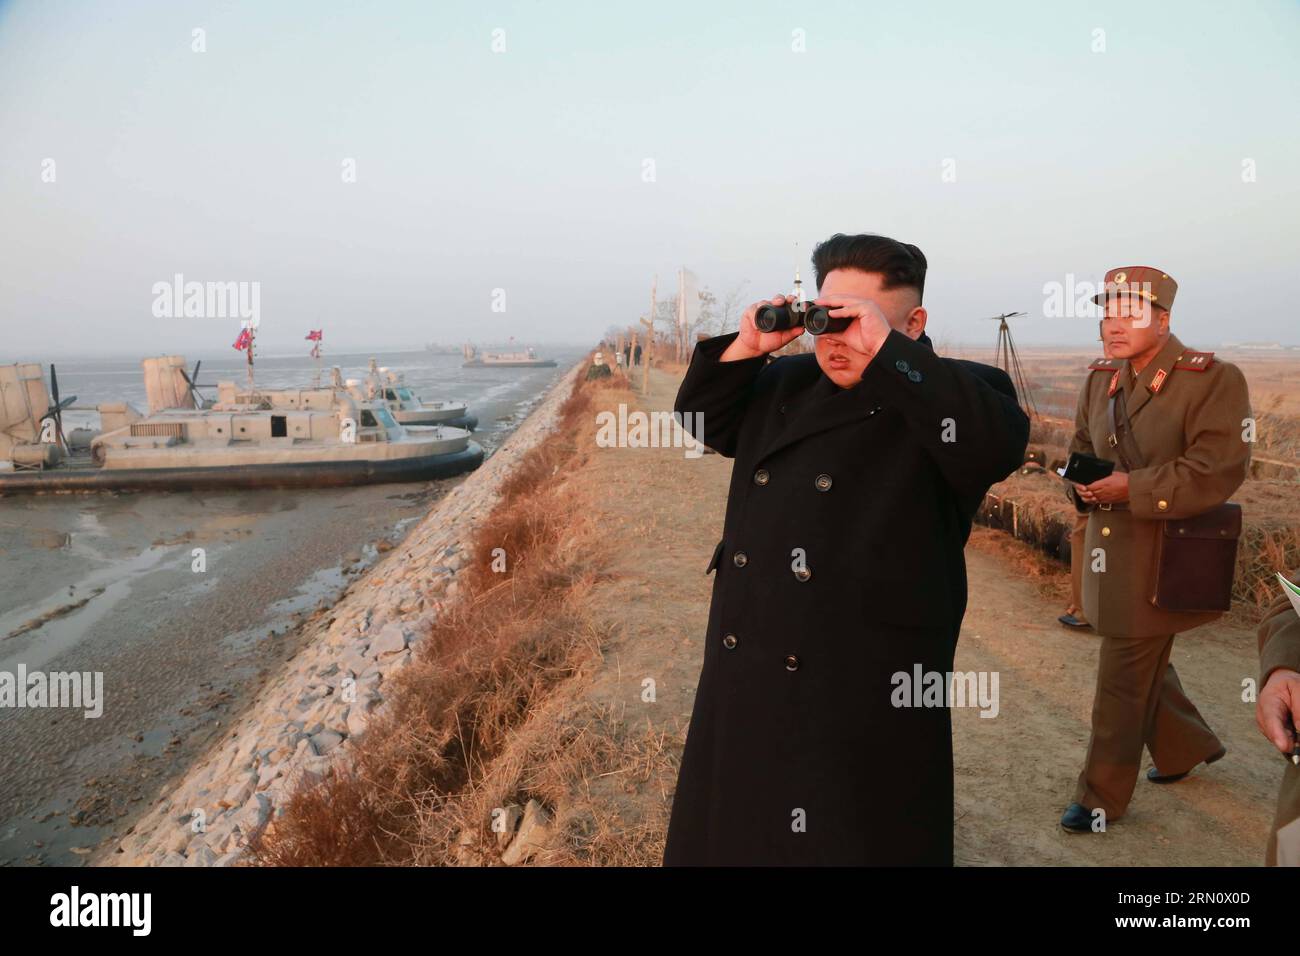 Photo provided by Korean Central News Agency () on Nov.23, 2014 shows top leader of the Democratic People s Republic of Korea (DPRK) Kim Jong Un (L) inspecting a combined joint drill of the units under KPA Large Combined Units 572 and 630. Kim Jong Un watched the whole process of the exercise and required all military units to rehearse under simulated conditions of a real war and be well prepared at all times. ) DPRK-KIM JONG UN-COMBINED MILITARY DRILL KCNA PUBLICATIONxNOTxINxCHN   Photo provided by Korean Central News Agency ON Nov 23 2014 Shows Top Leader of The Democratic Celebrities S Repu Stock Photo